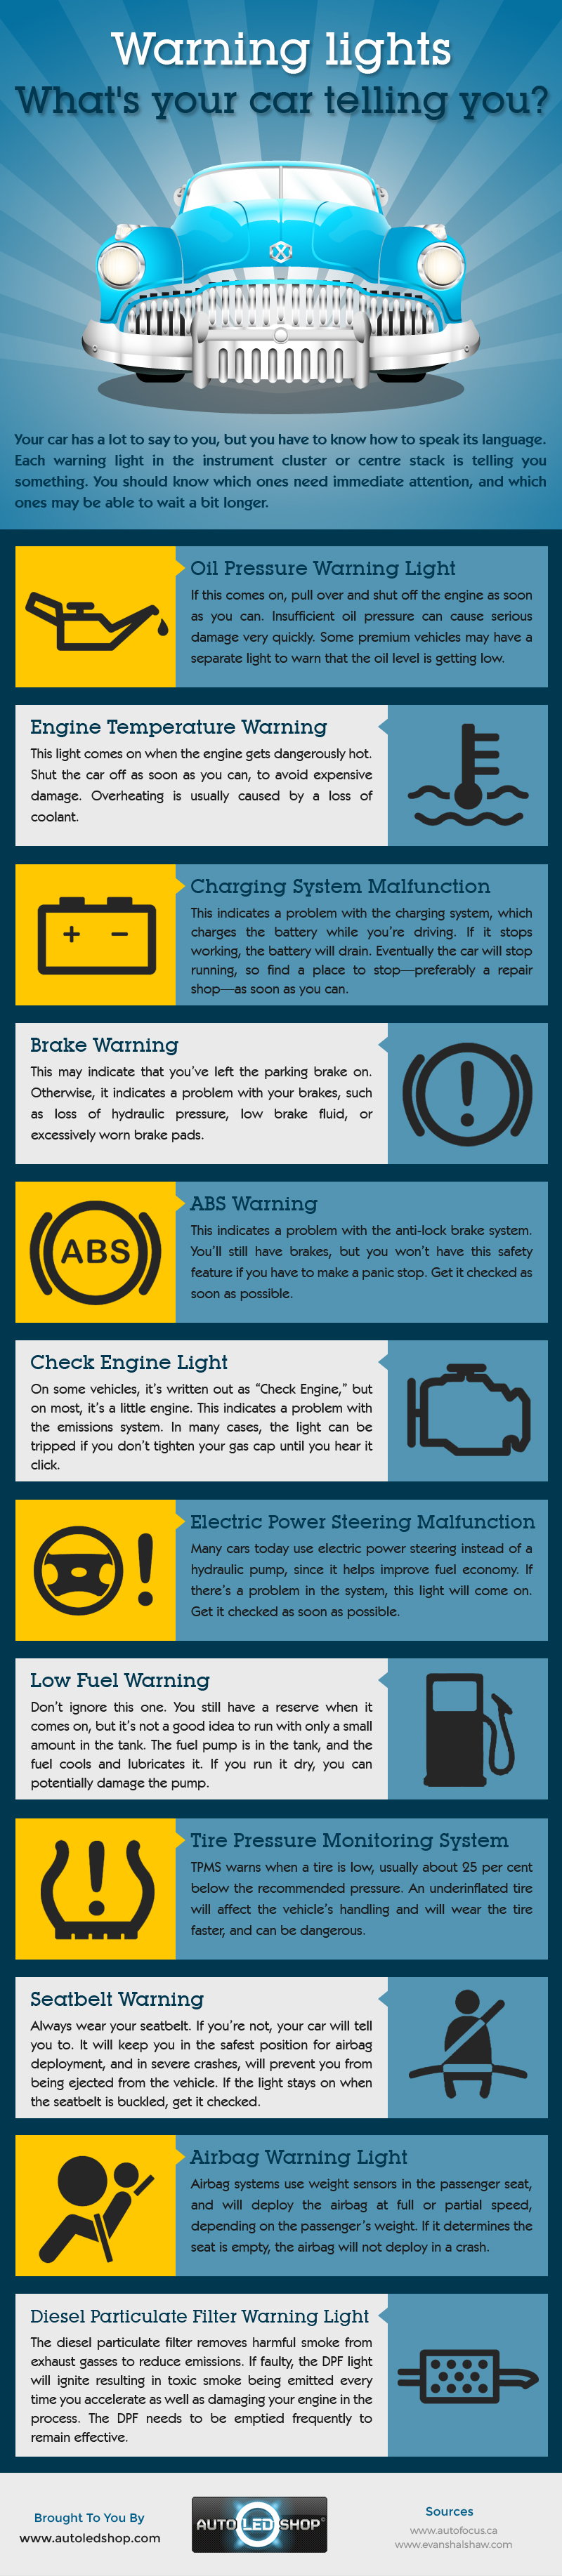 Warning Lights What's Your Car Telling You